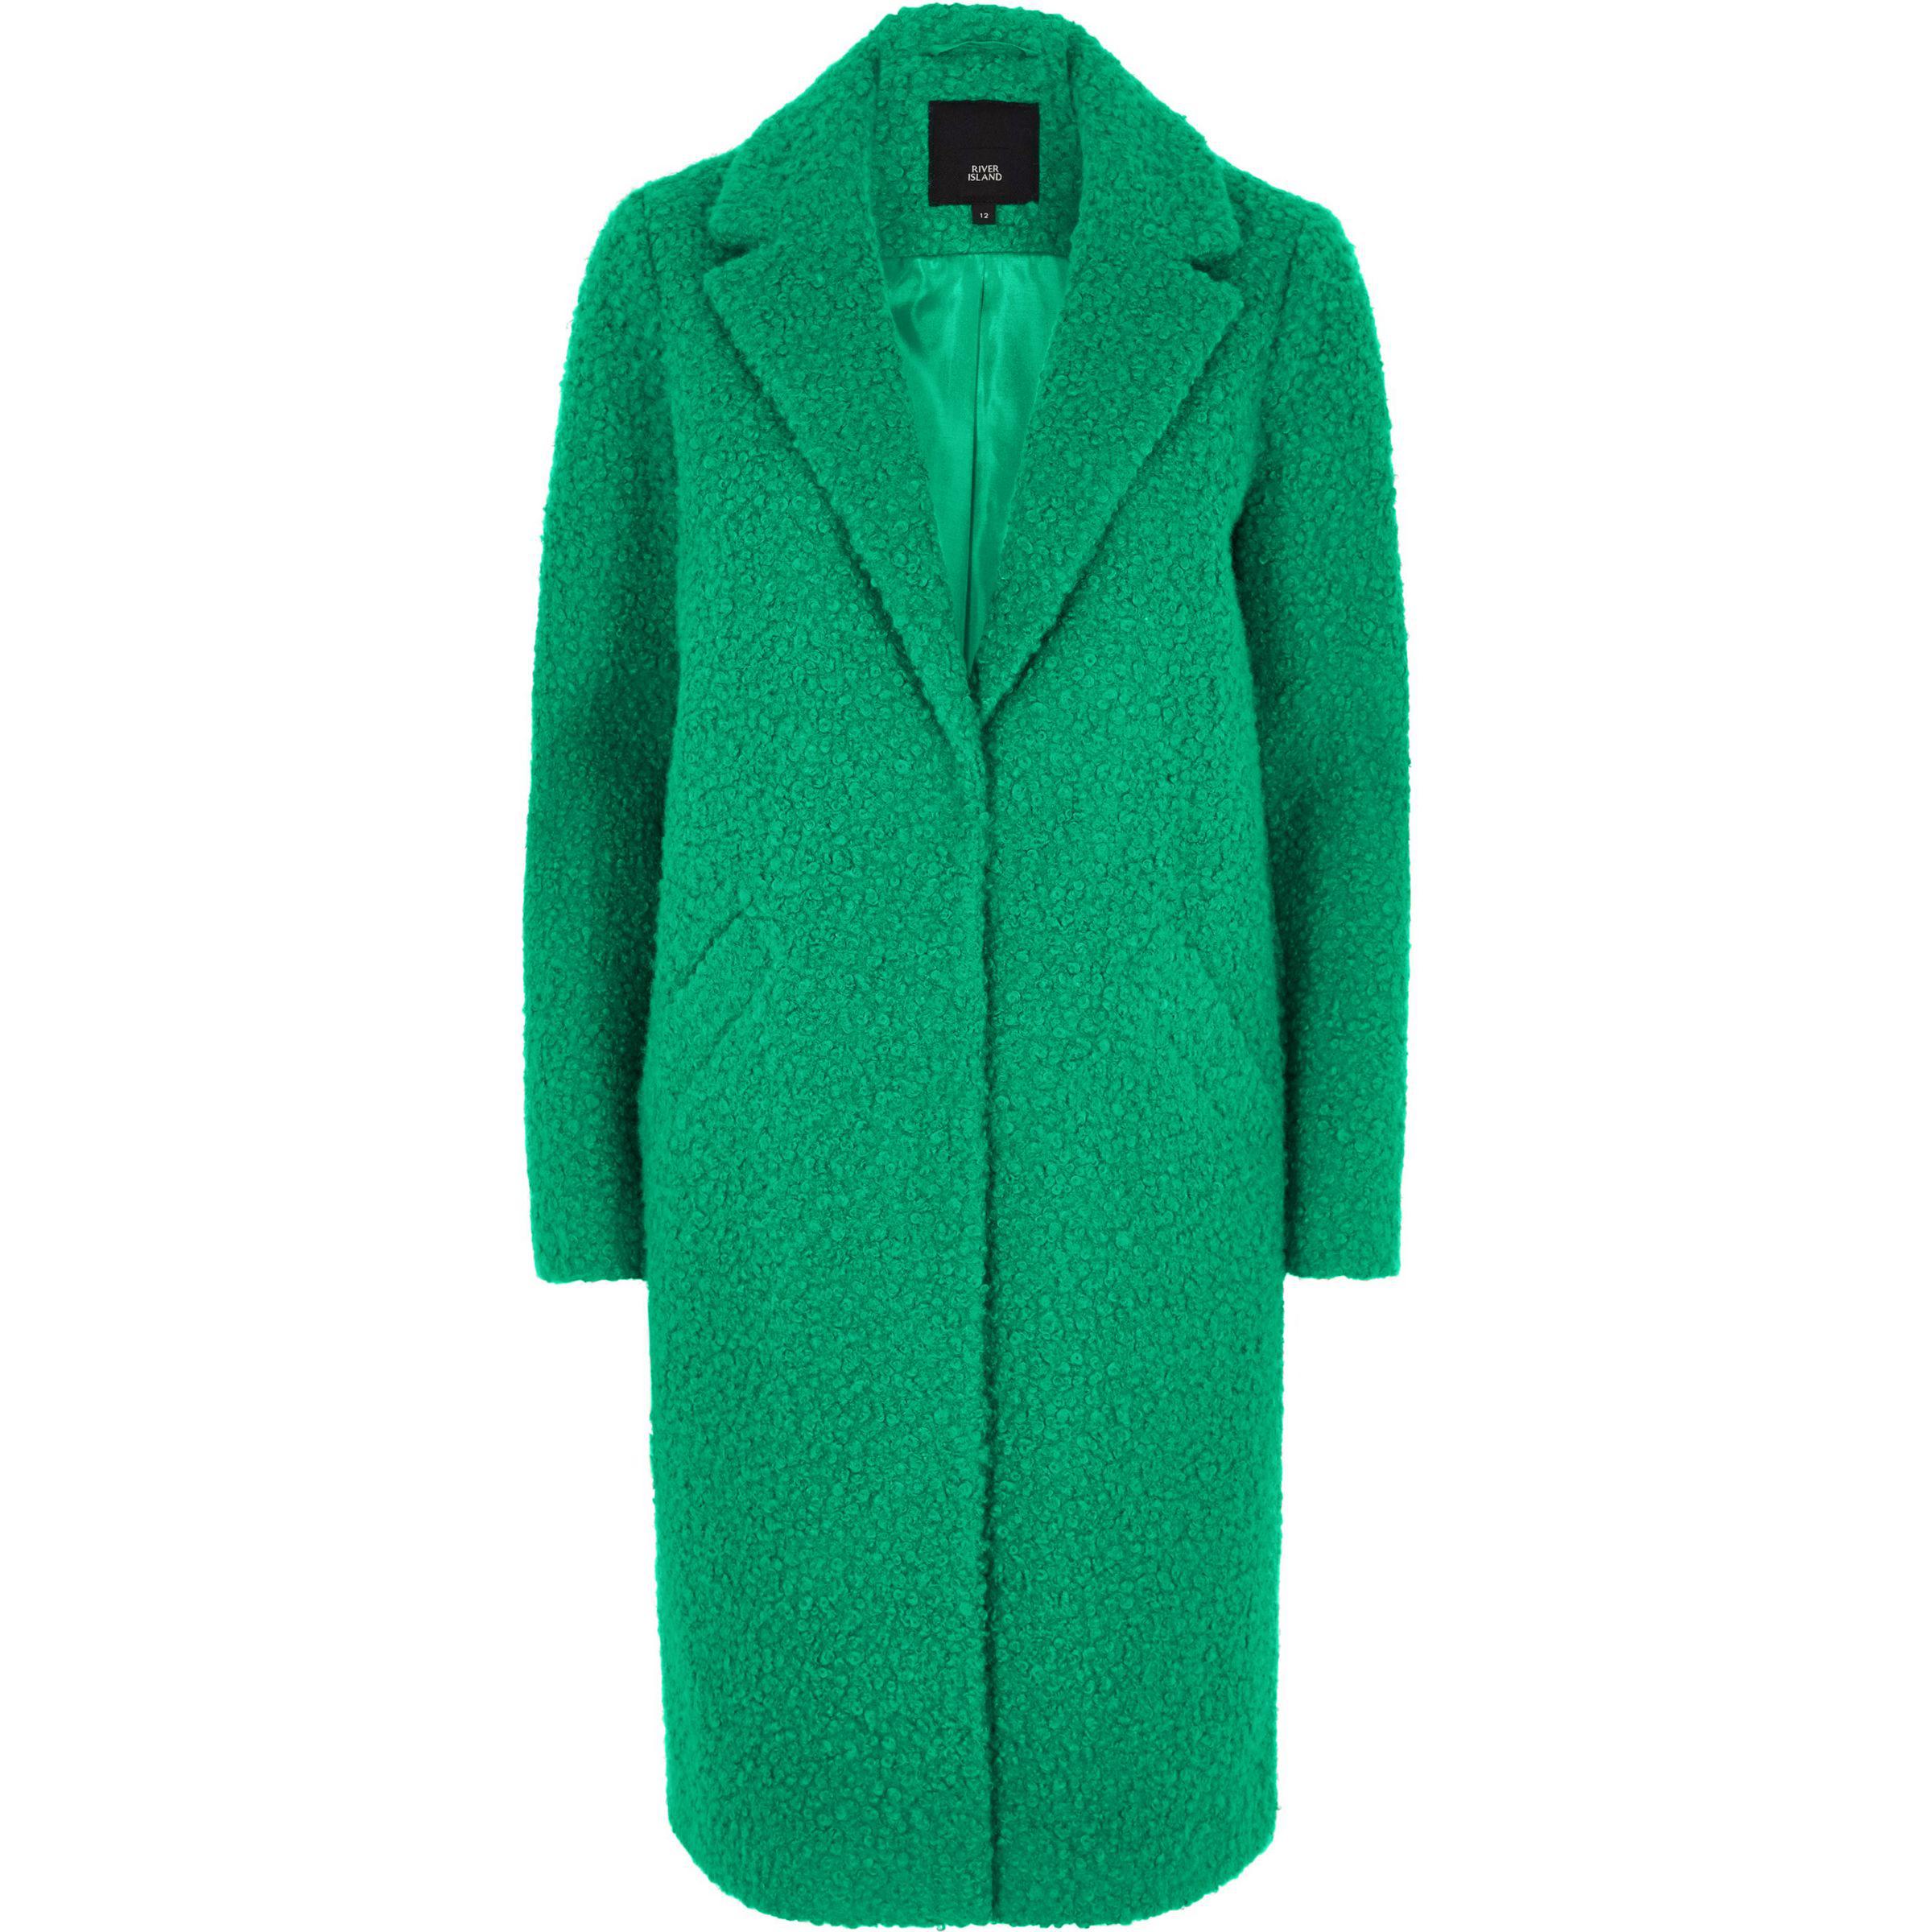 River Island Boucle Coat in Green - Lyst